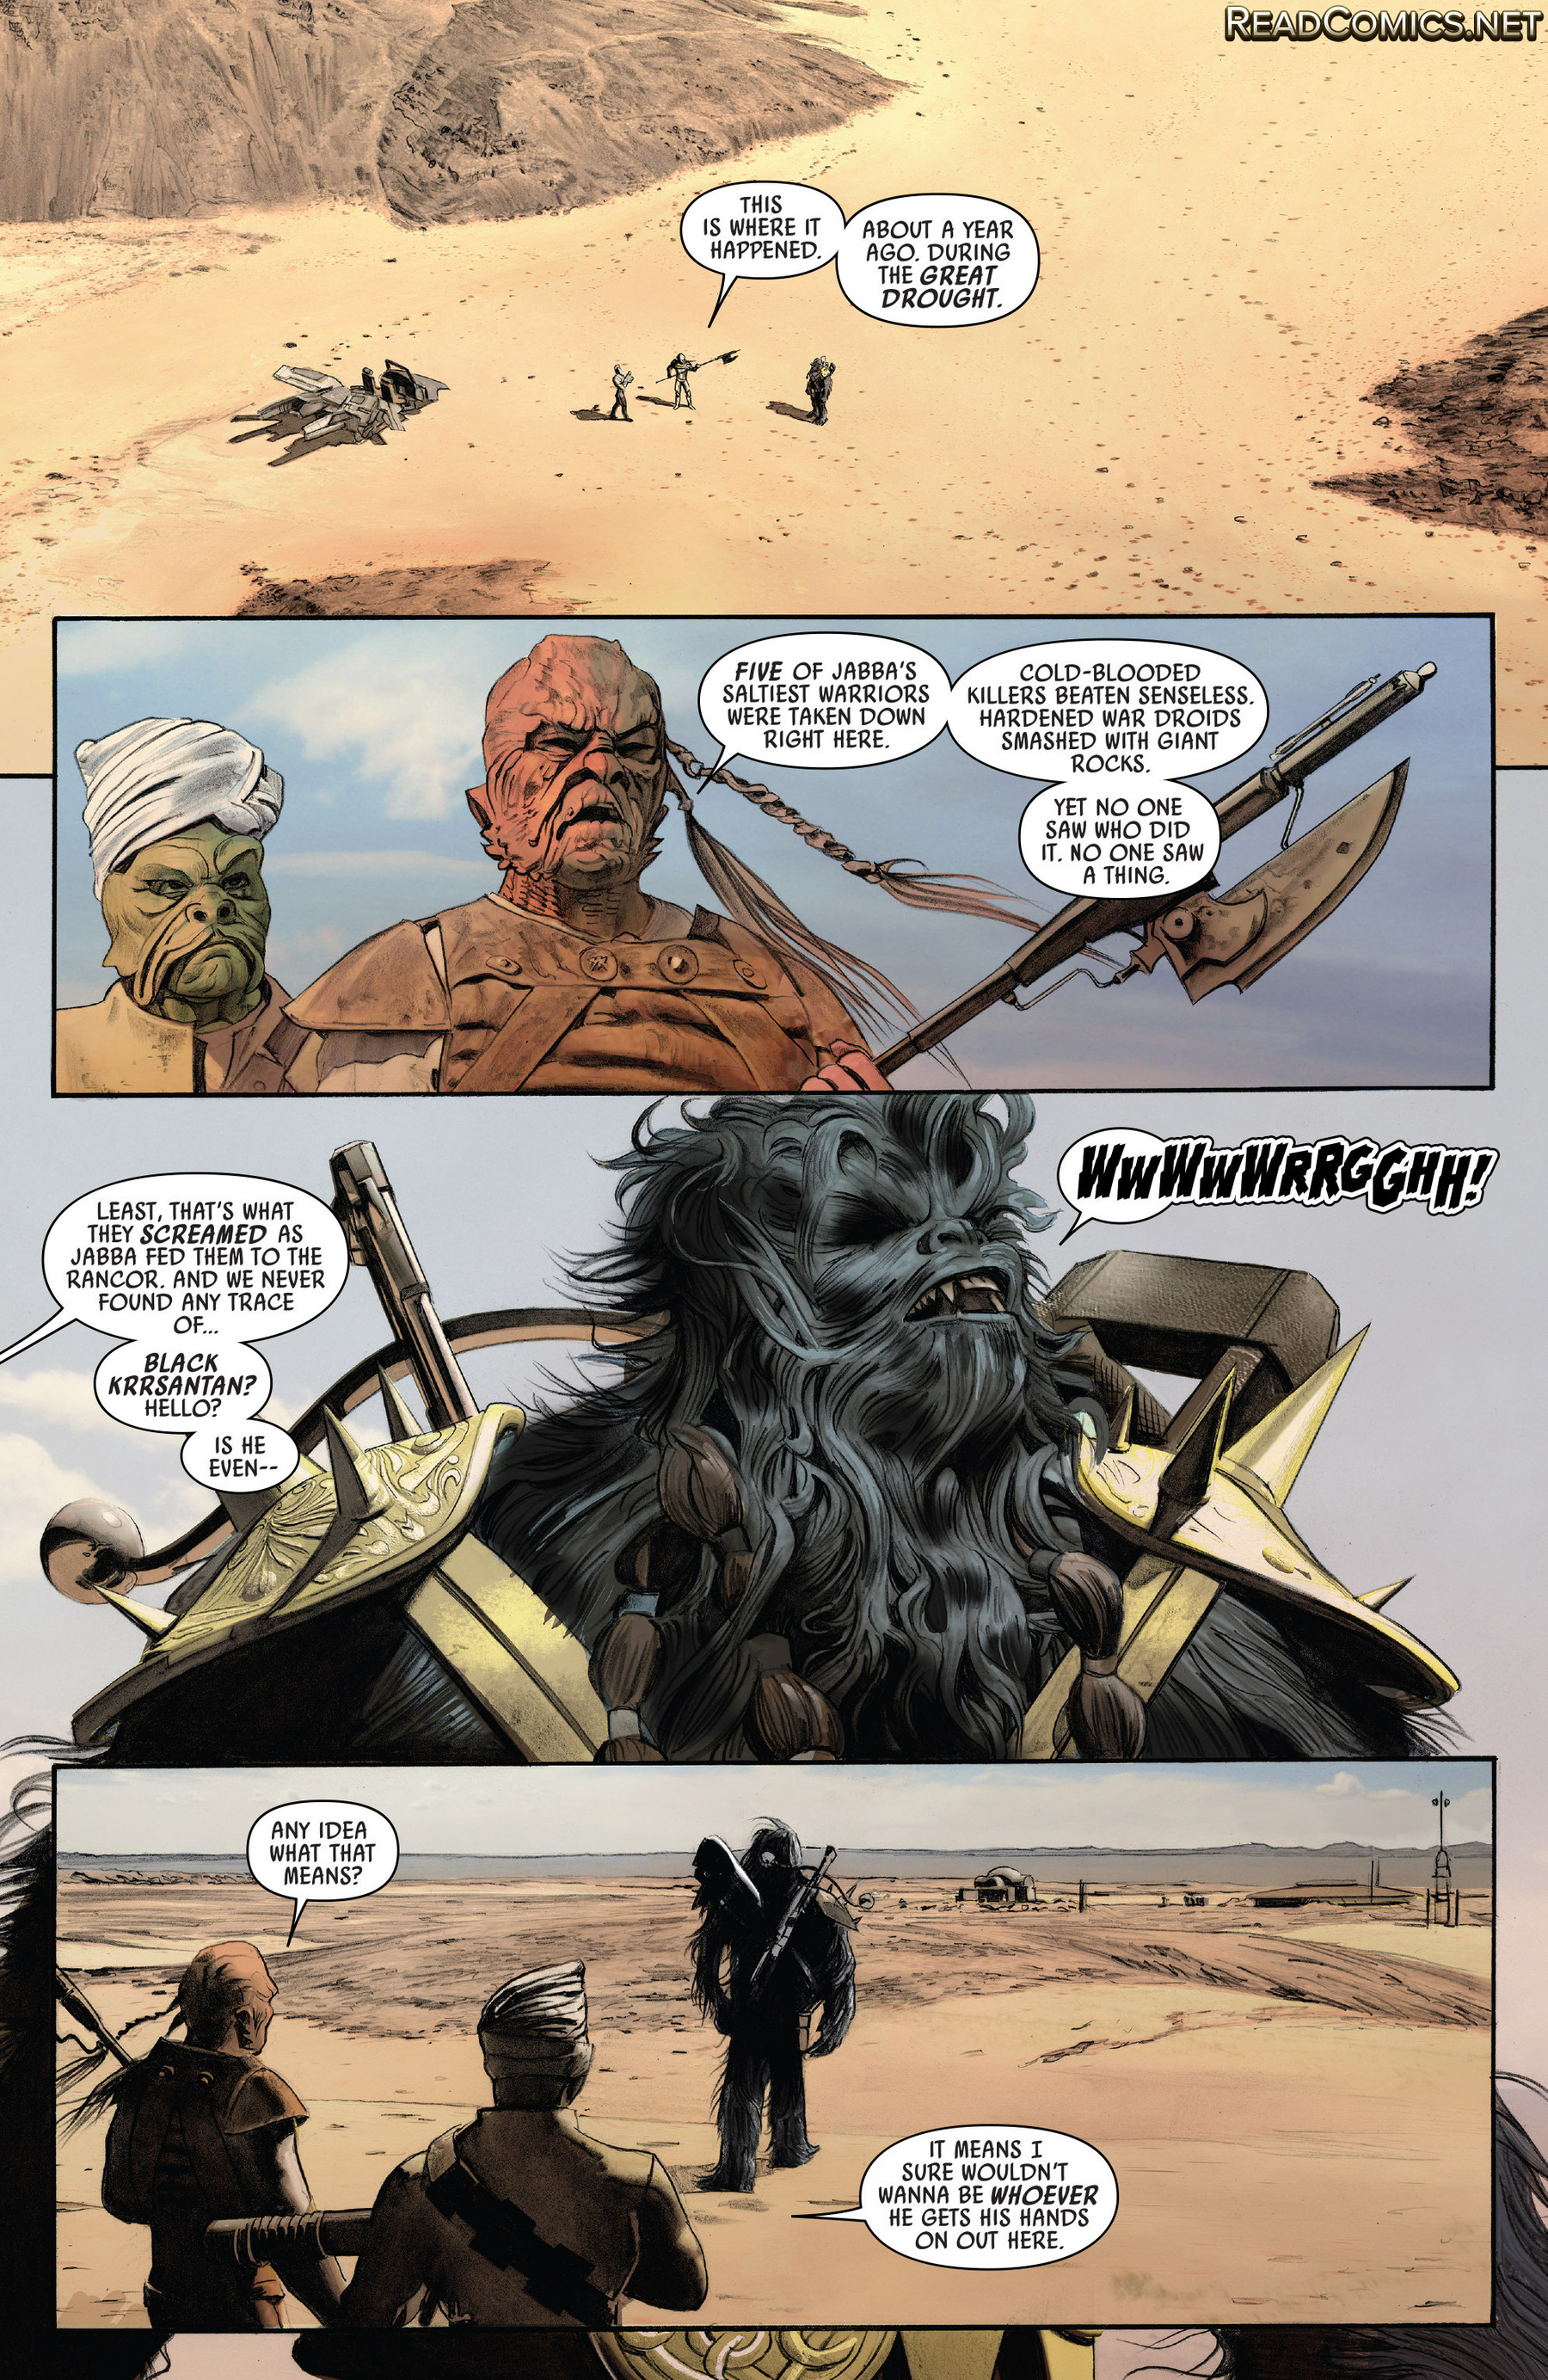 Star Wars (2015-): Chapter 20 - Page 3